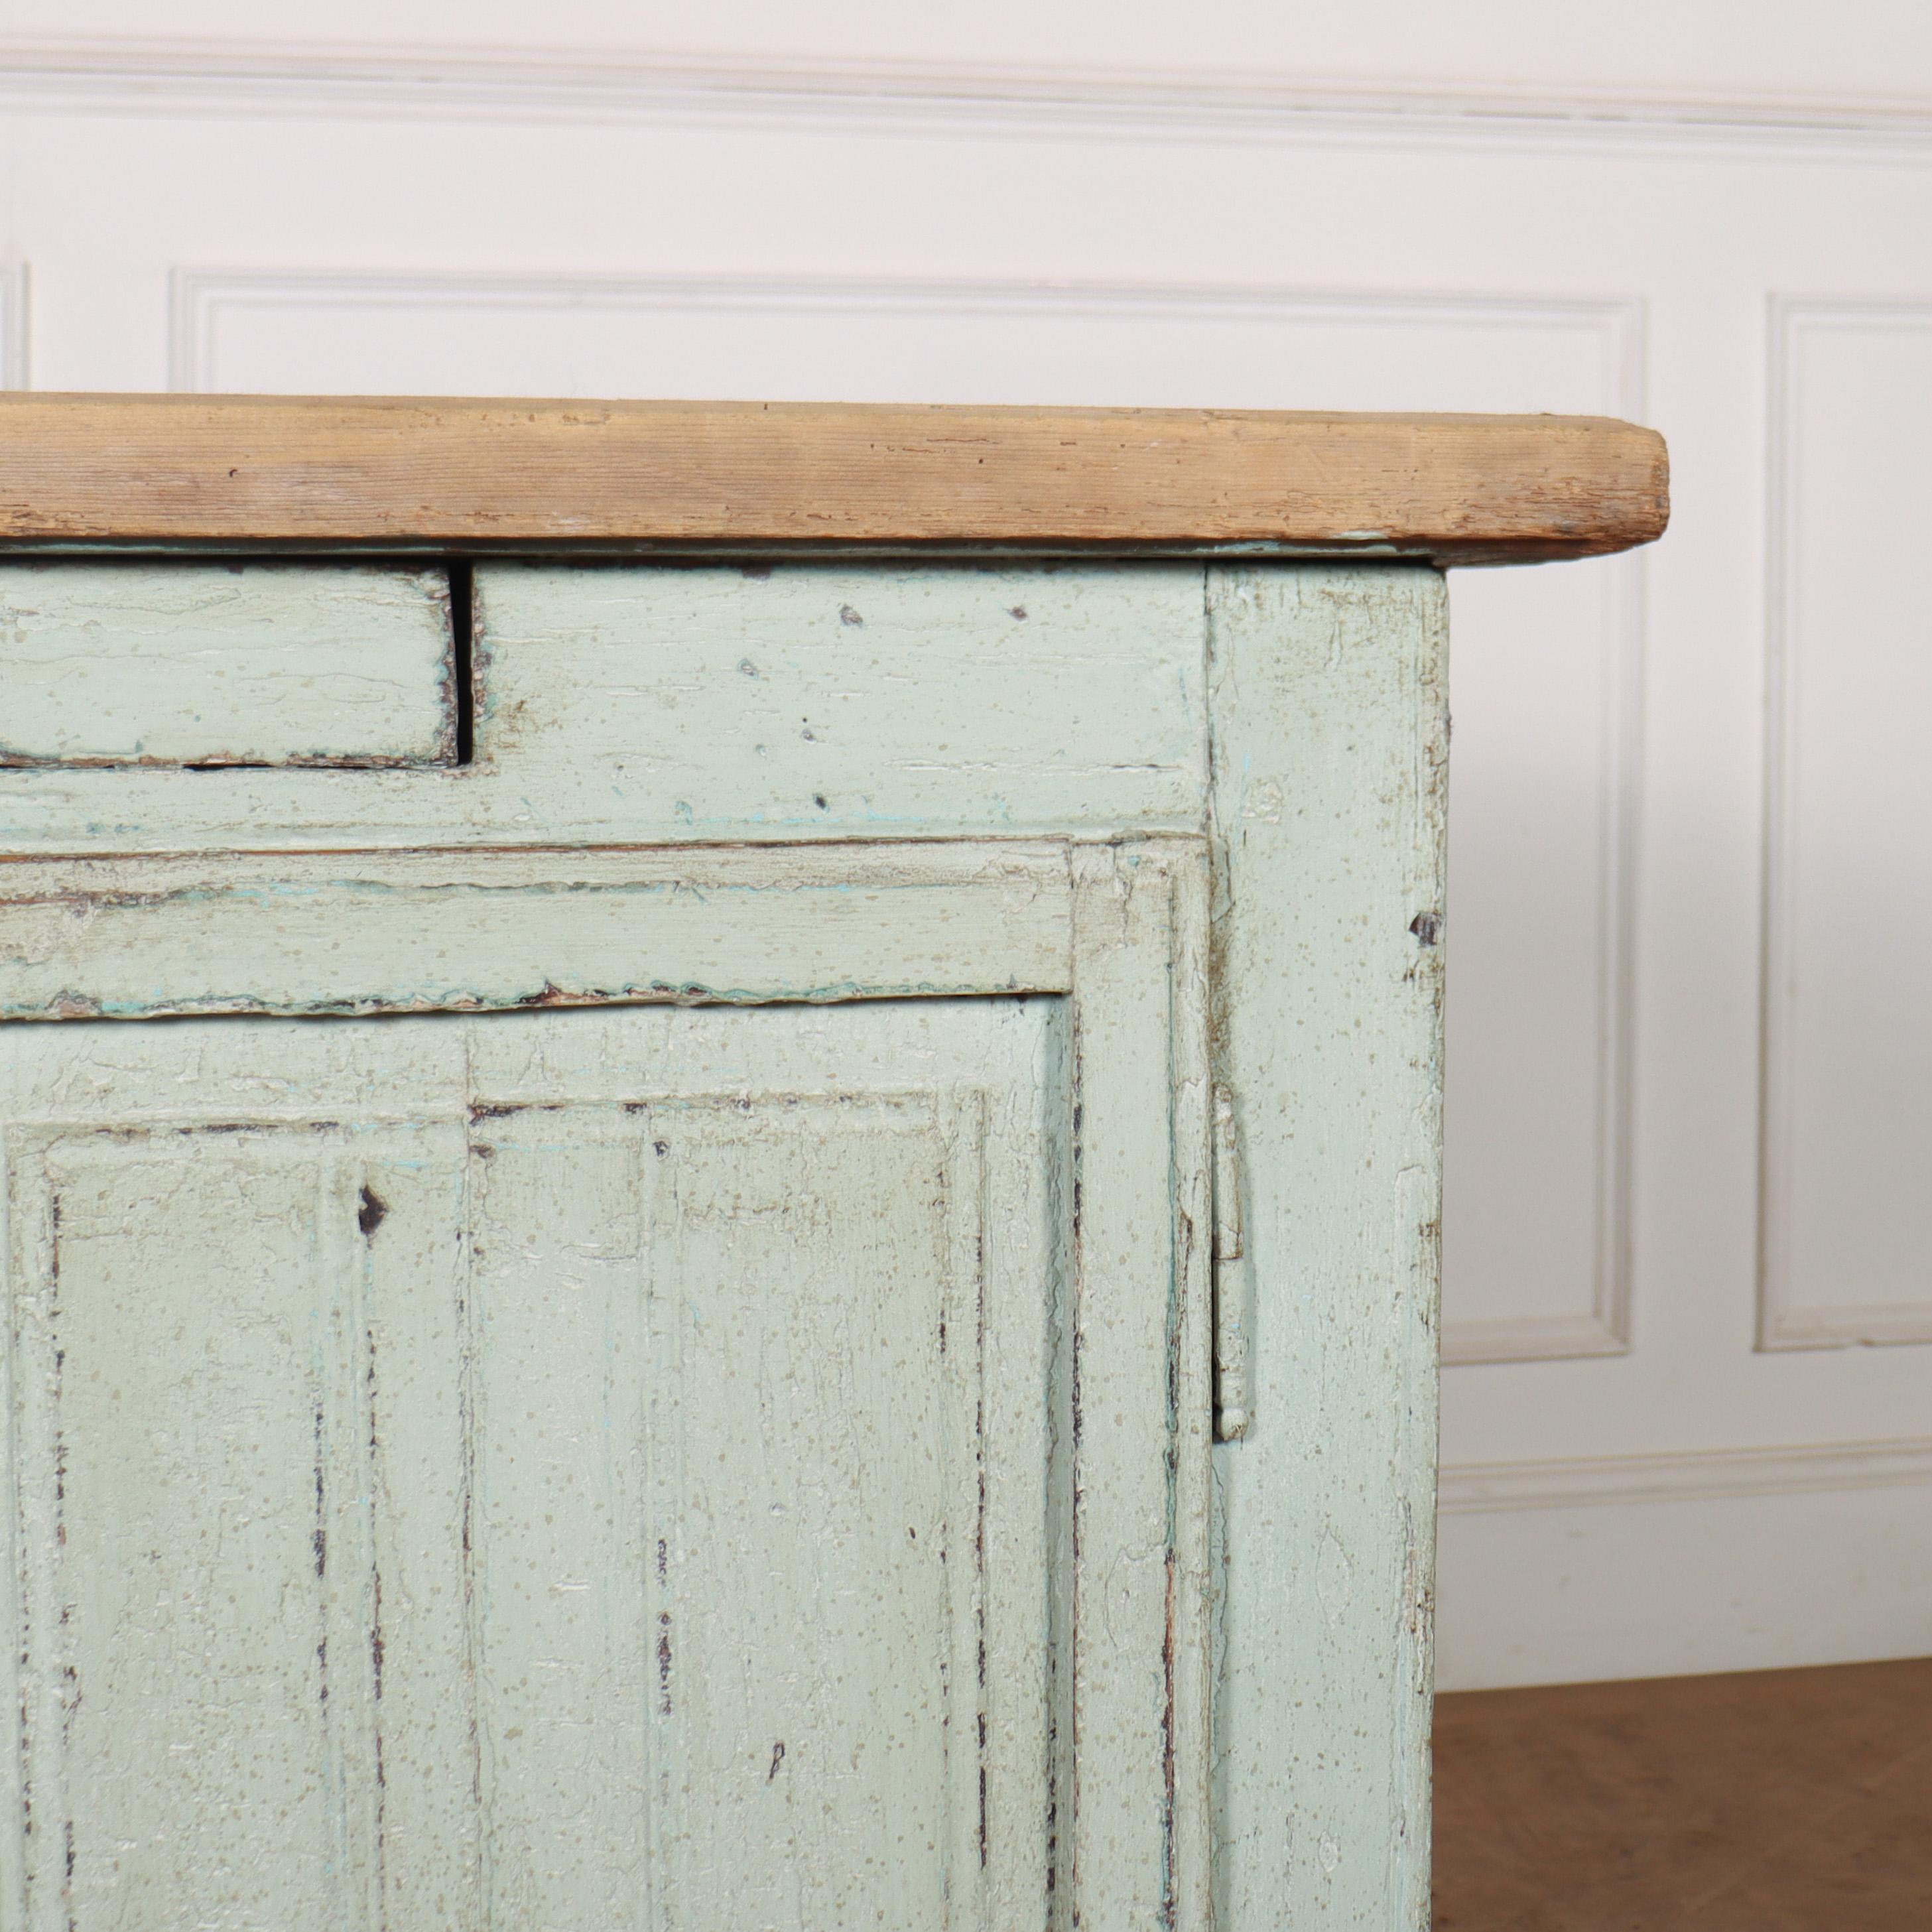 Small English painted pine kitchen island. 1880.

Reference: 8117

Dimensions
44 inches (112 cms) Wide
28 inches (71 cms) Deep
34 inches (86 cms) High